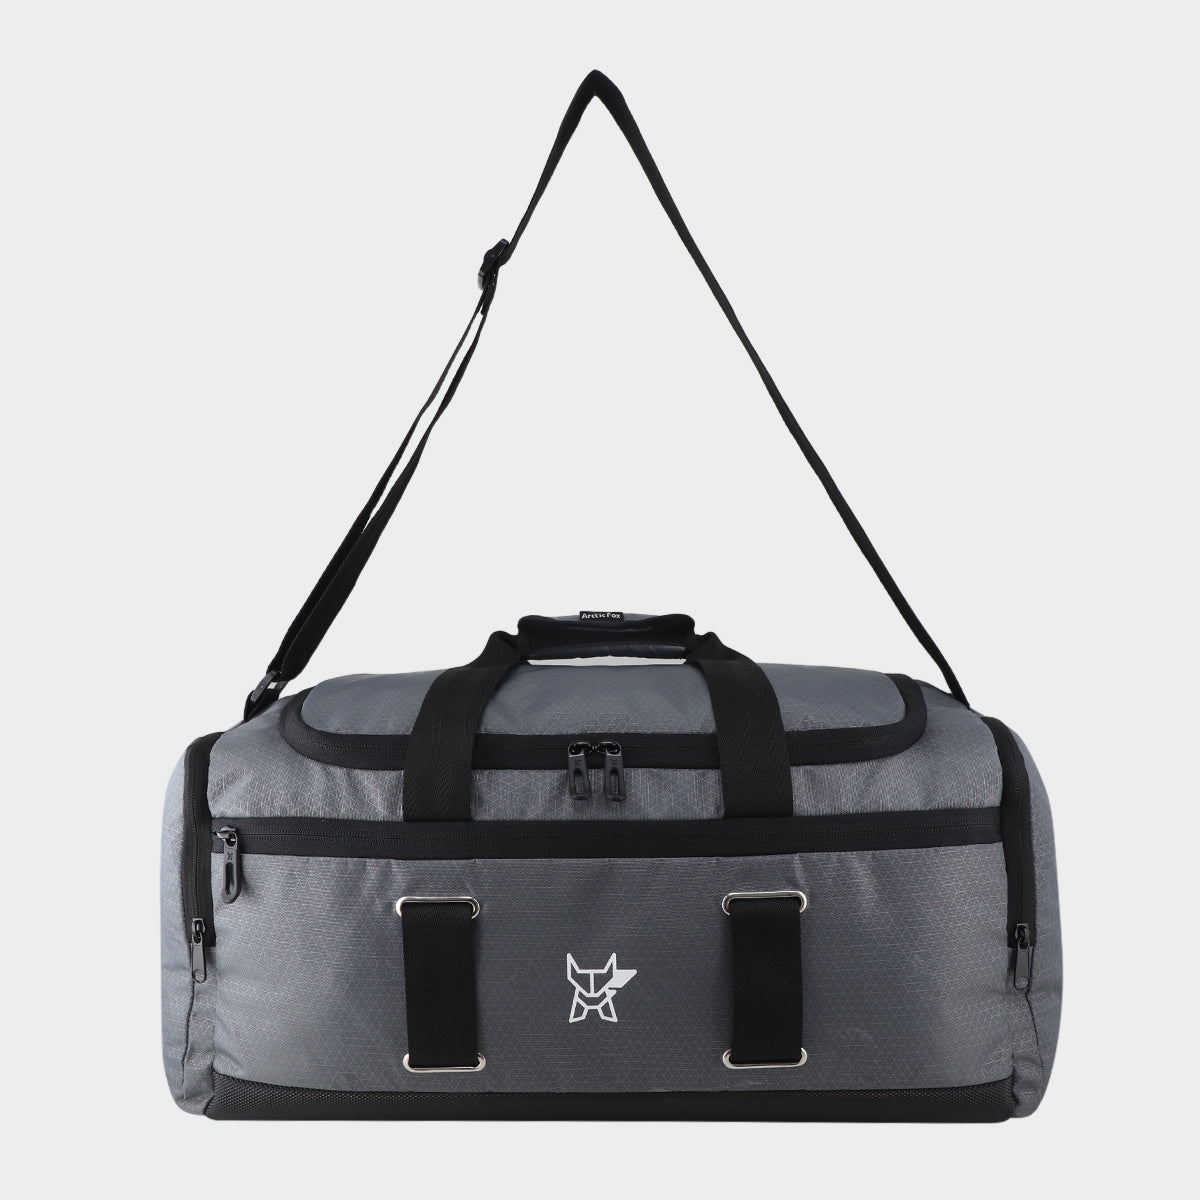 UA Travel Duffle Waterproof Bag Shoulder and Handbag Under Armour 50L  Backpack - Black: Buy Online at Best Price in Egypt - Souq is now Amazon.eg